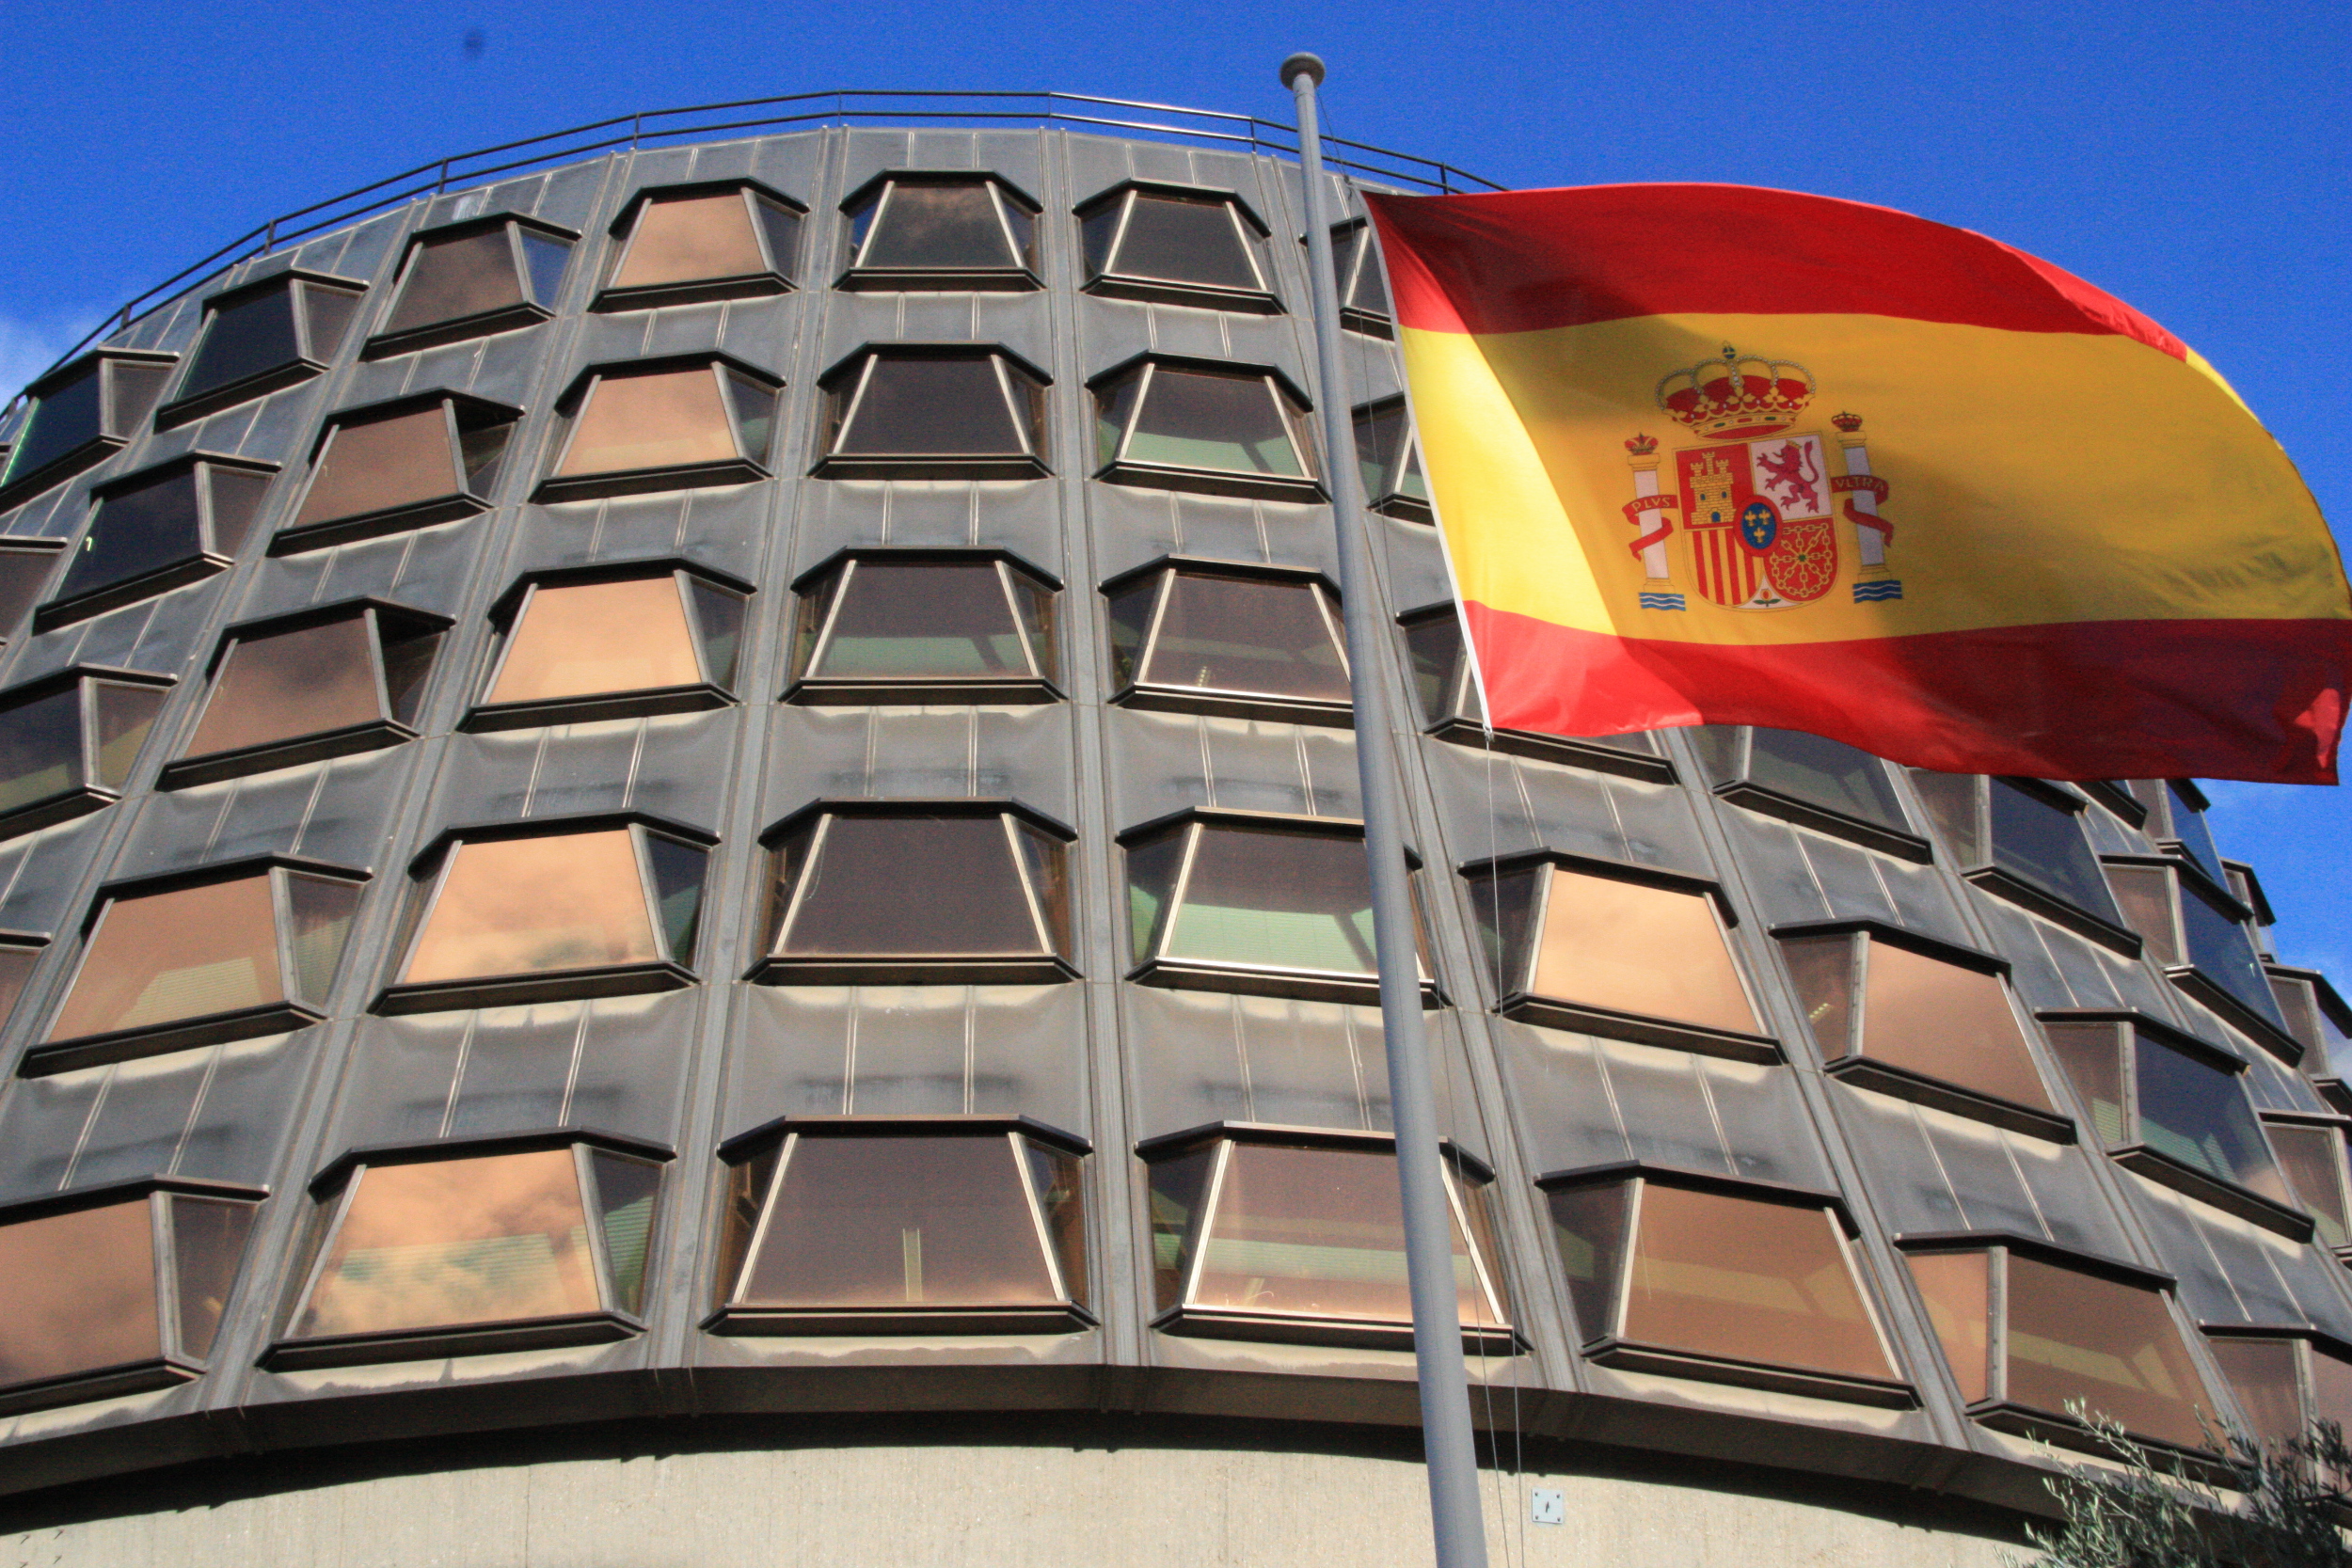 Spanish Constitutional Court's building, in Madrid (by ACN)